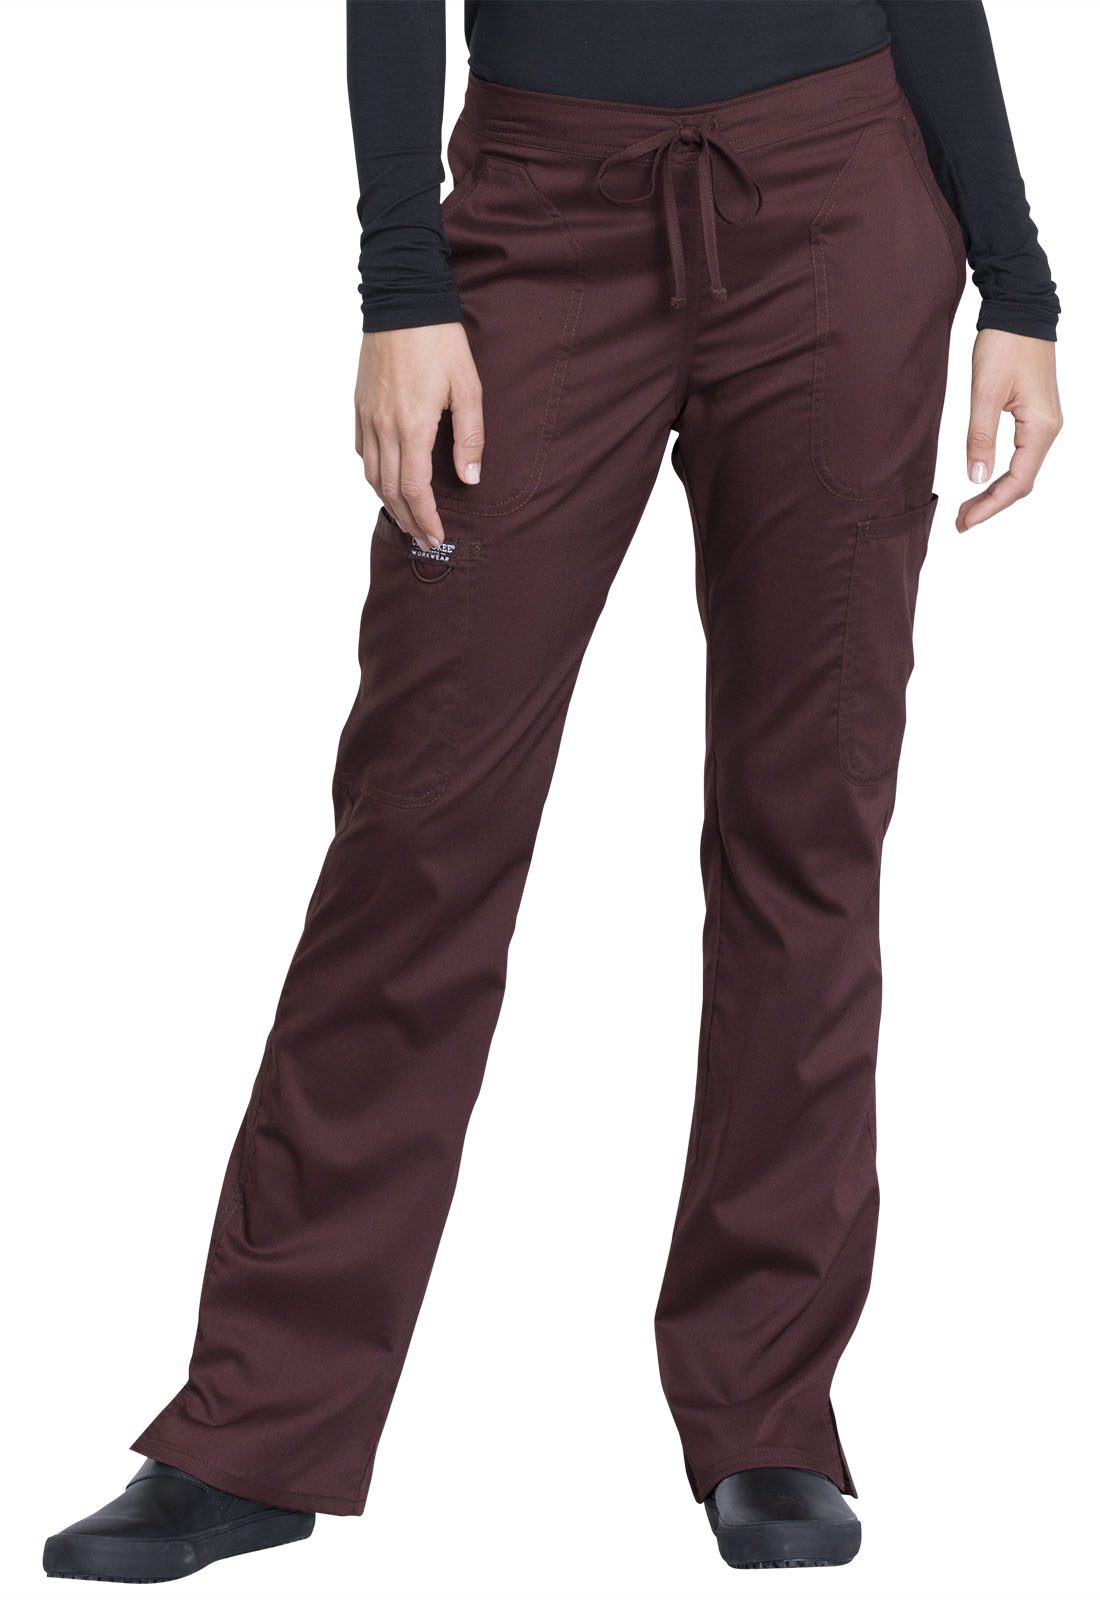 Mid Rise Moderate Flare Drawstring Pant in Regular